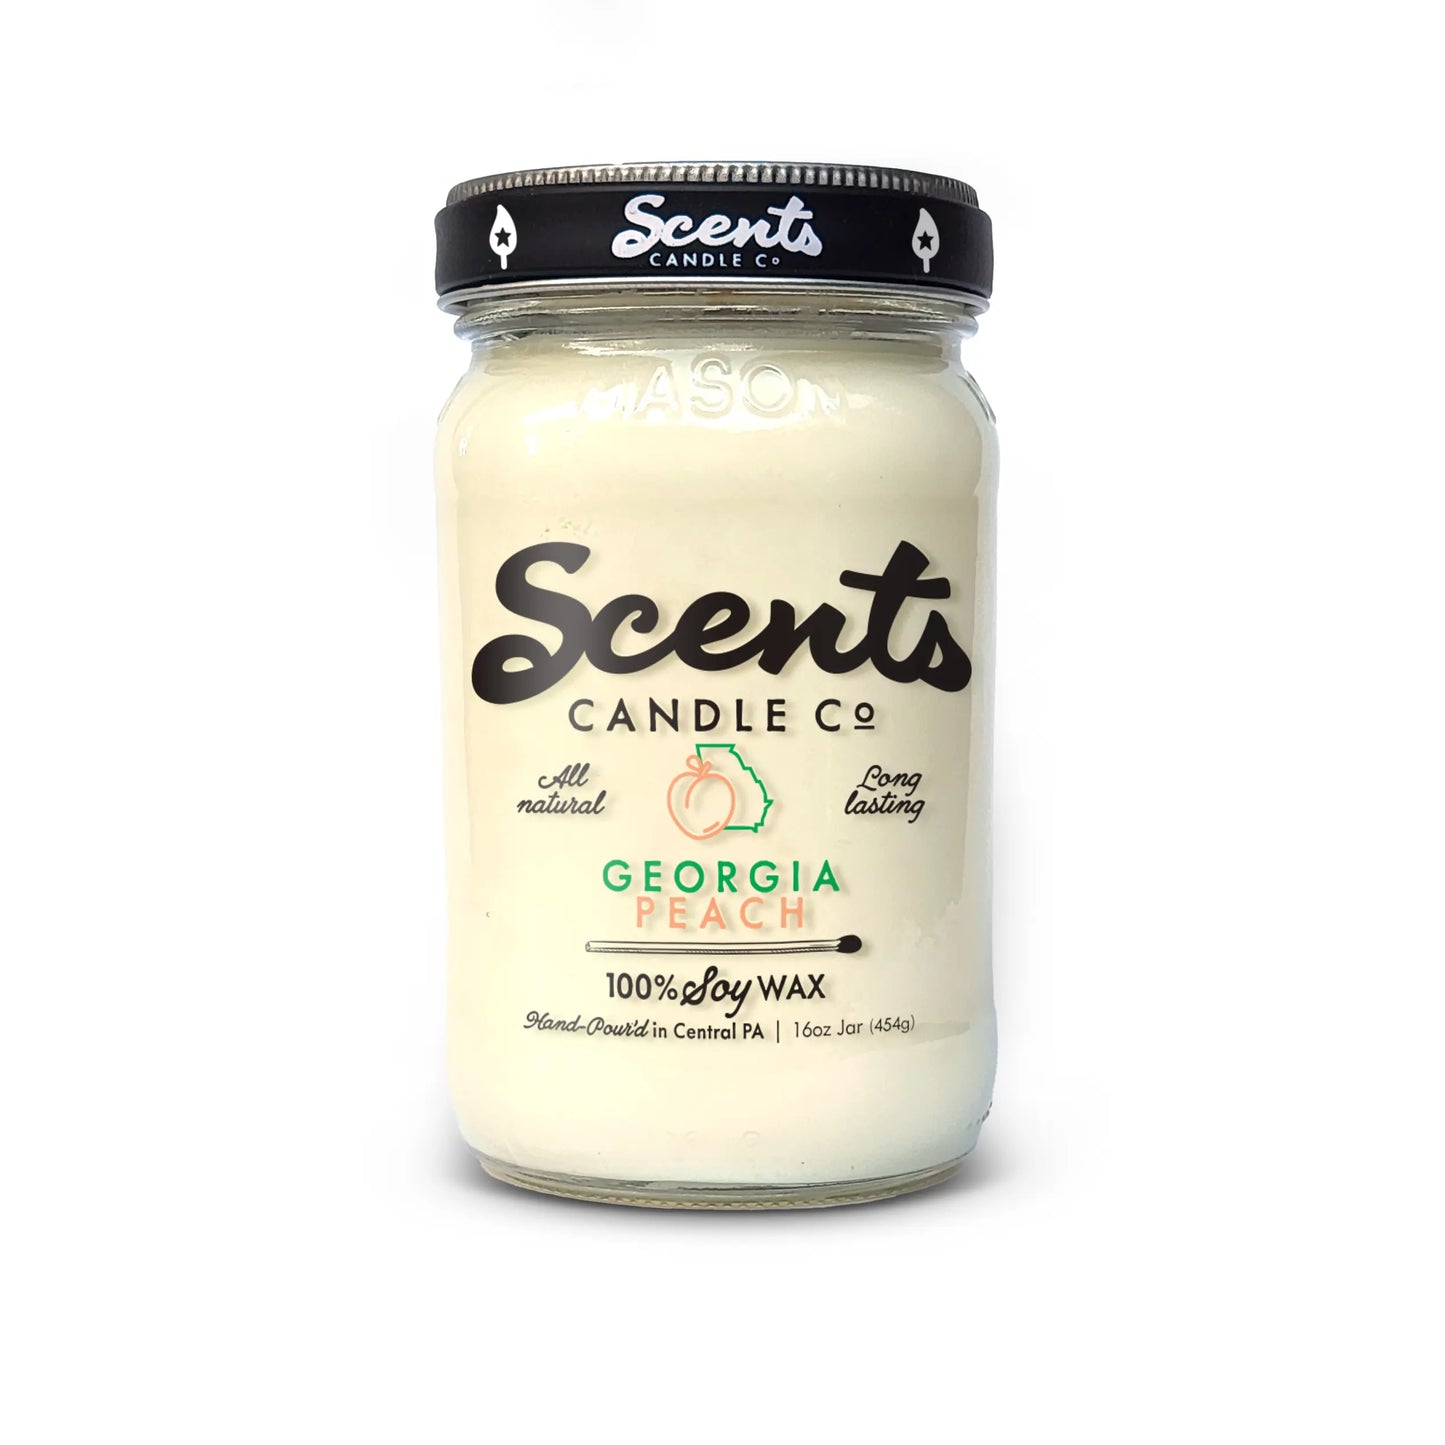 Scents Candle Co. Georgia Peach Soy Wax Candles